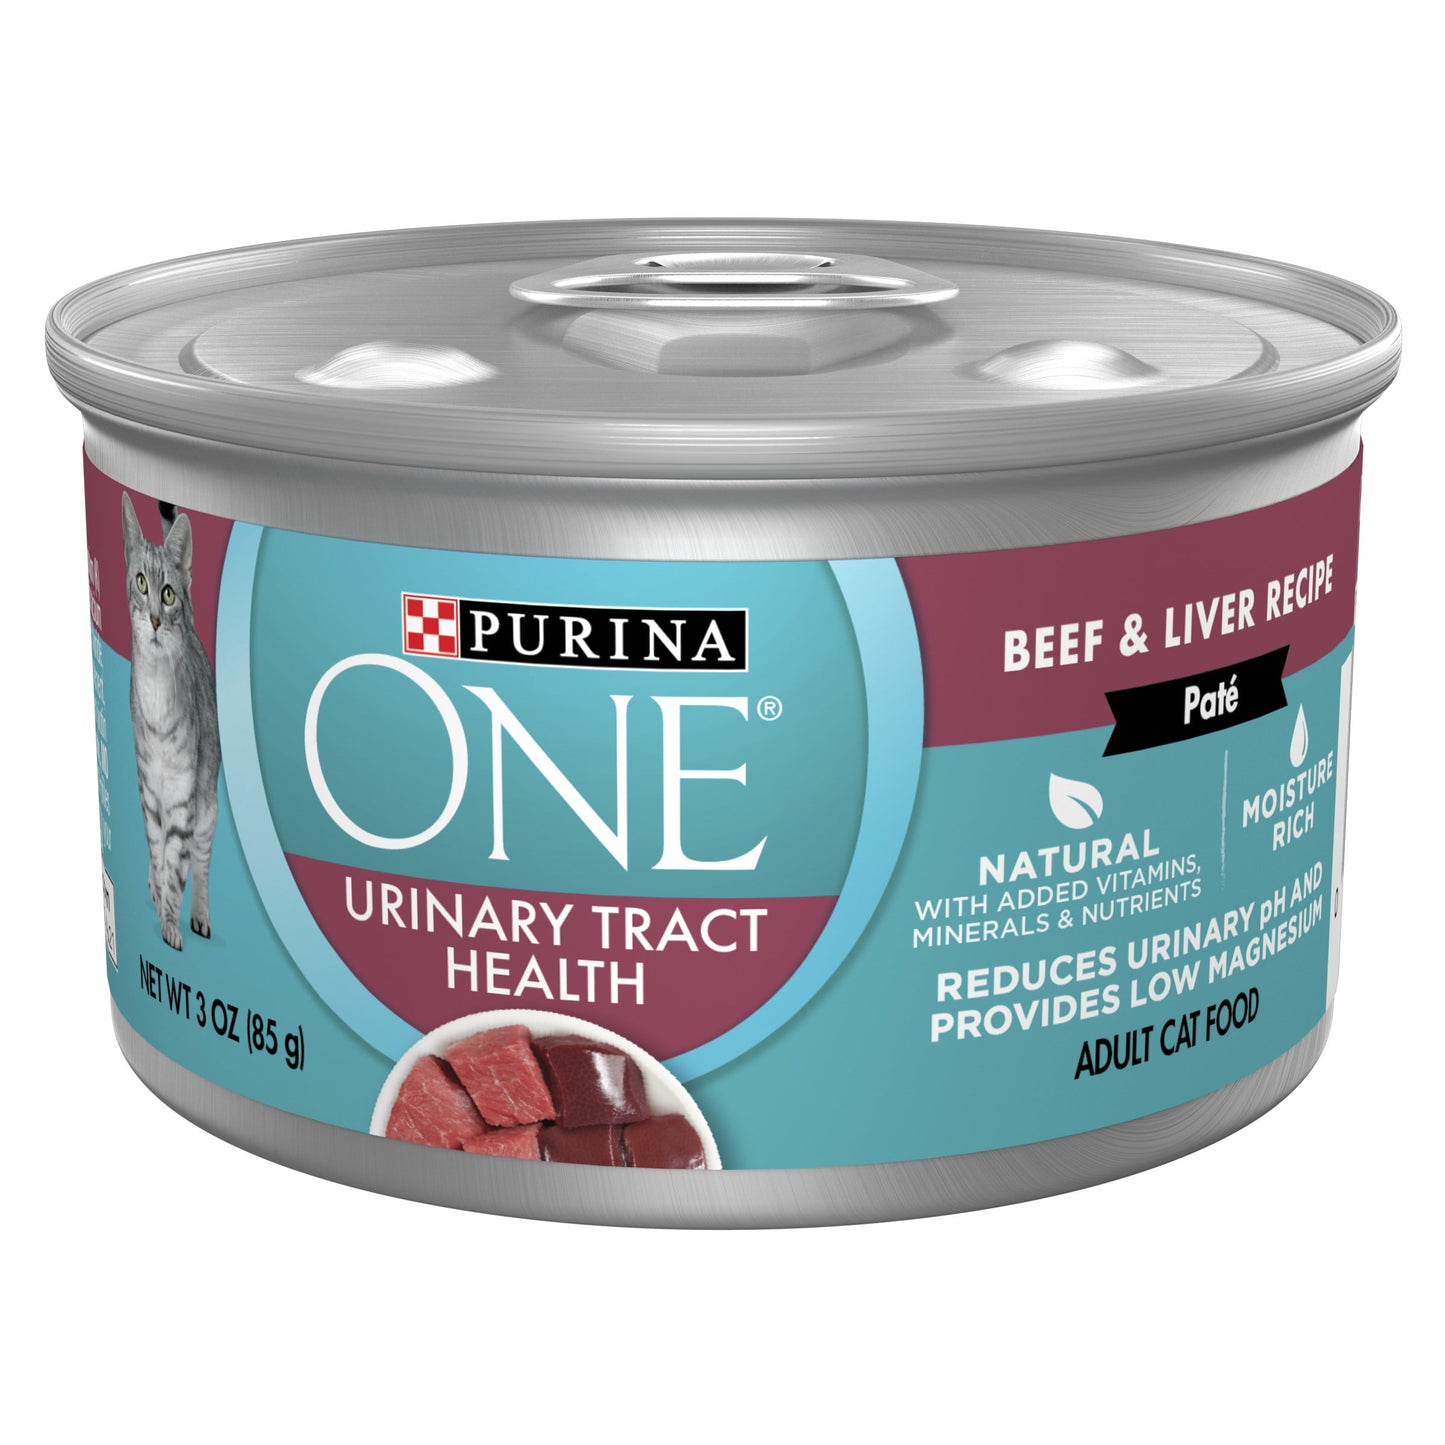 Purina ONE Urinary Tract Health, Natural Pate Wet Cat Food, Urinary Tract Health Beef & Liver Recipe, 3 oz. Pull-Top Can